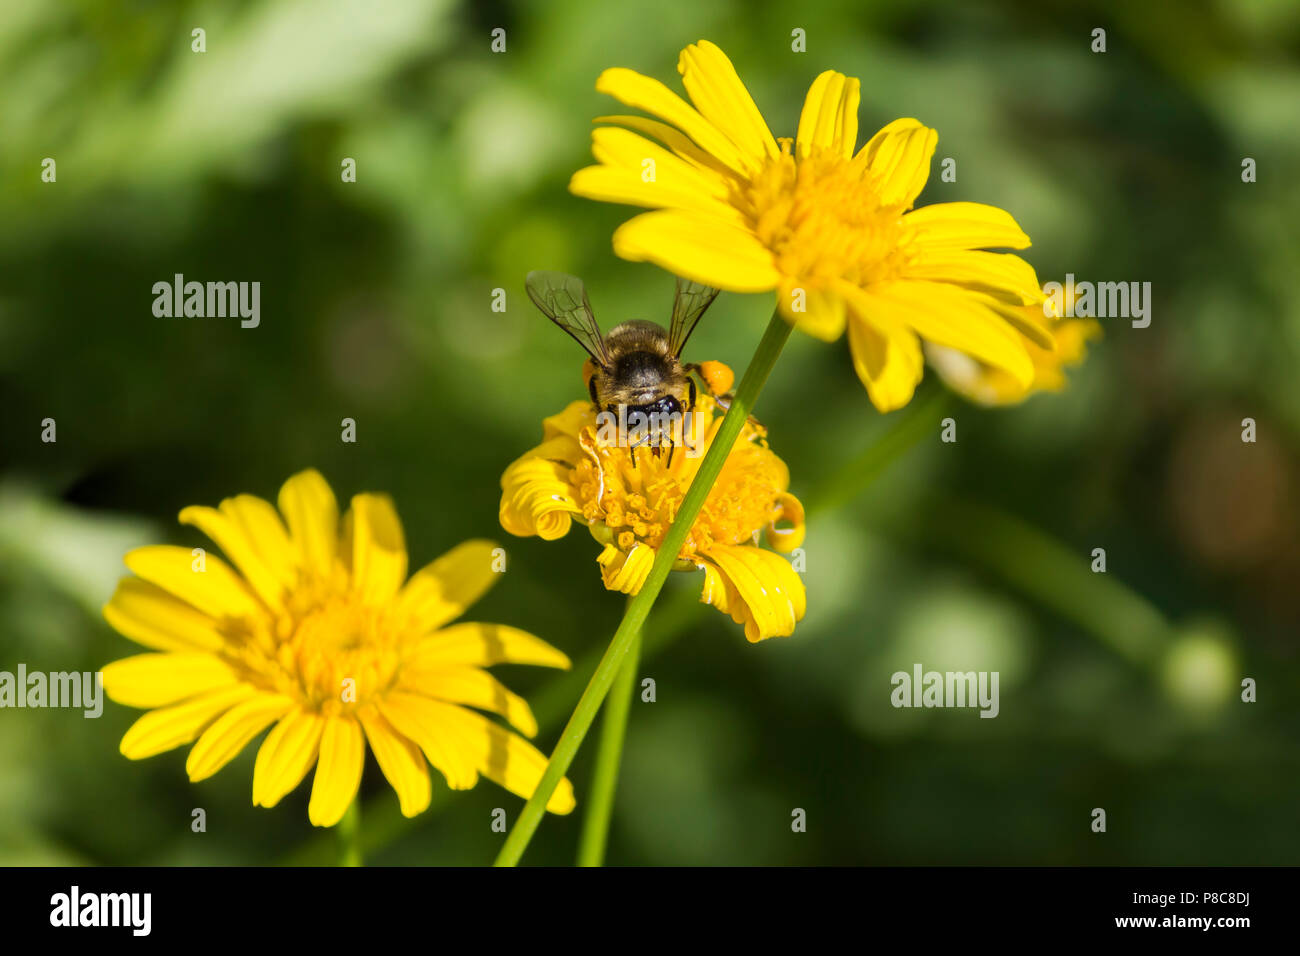 A bee on yellow daisy flower, collecting nectar and pollen. Stock Photo